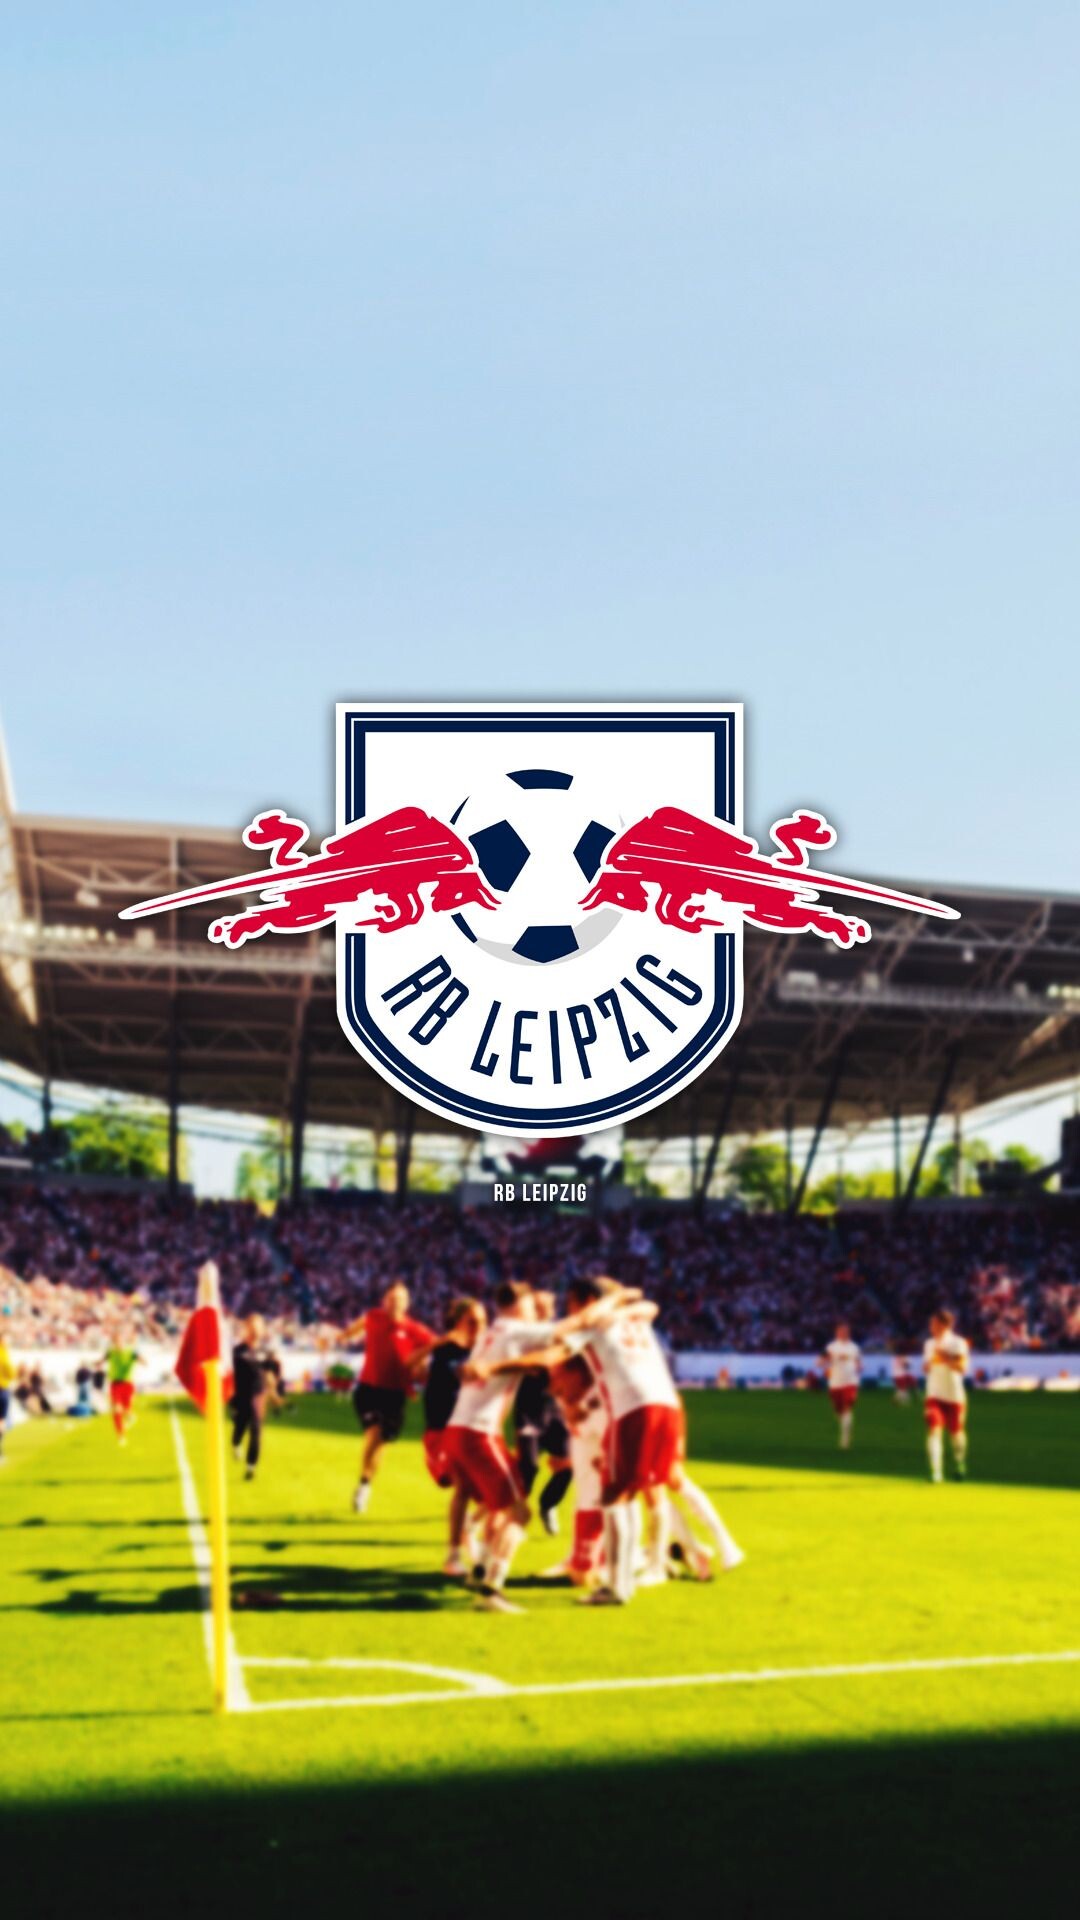 Germany Soccer Team: RB Leipzig, Founded in 2009 by the initiative of Red Bull, Domenico Tedesco - head coach. 1080x1920 Full HD Wallpaper.